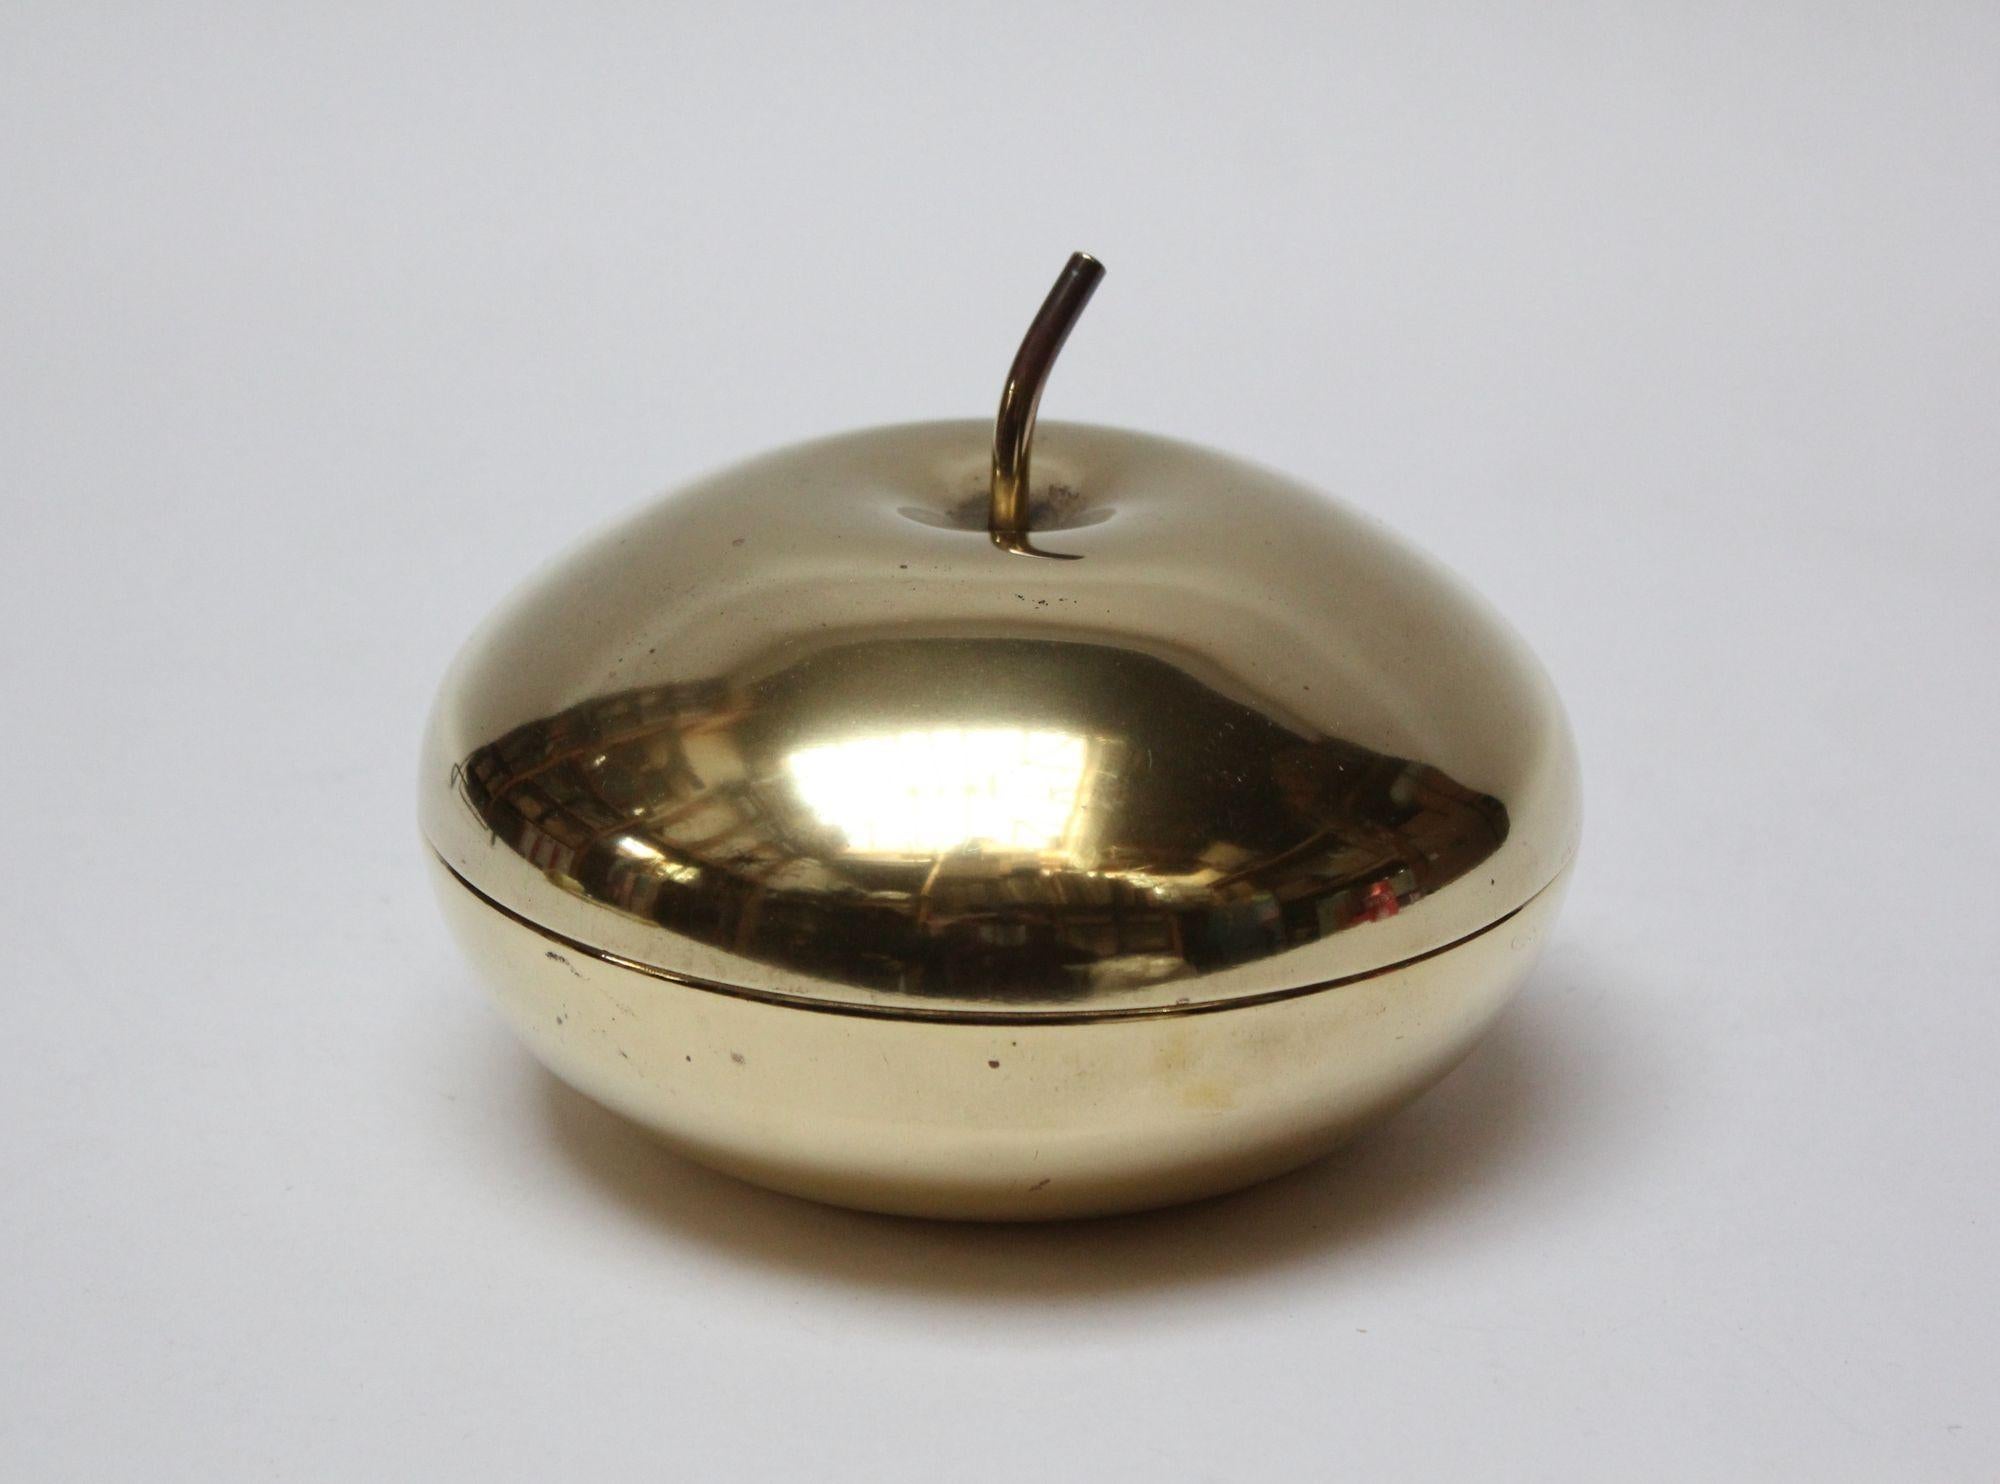 Mid-Century Italian Modern brass snack/candy/serving dish with lidded top formed to resemble an apple.
This is a shorter, uninsulated version of fruit and vegetable-formed ice buckets made in Italy and France at the time.
Though shallow, this